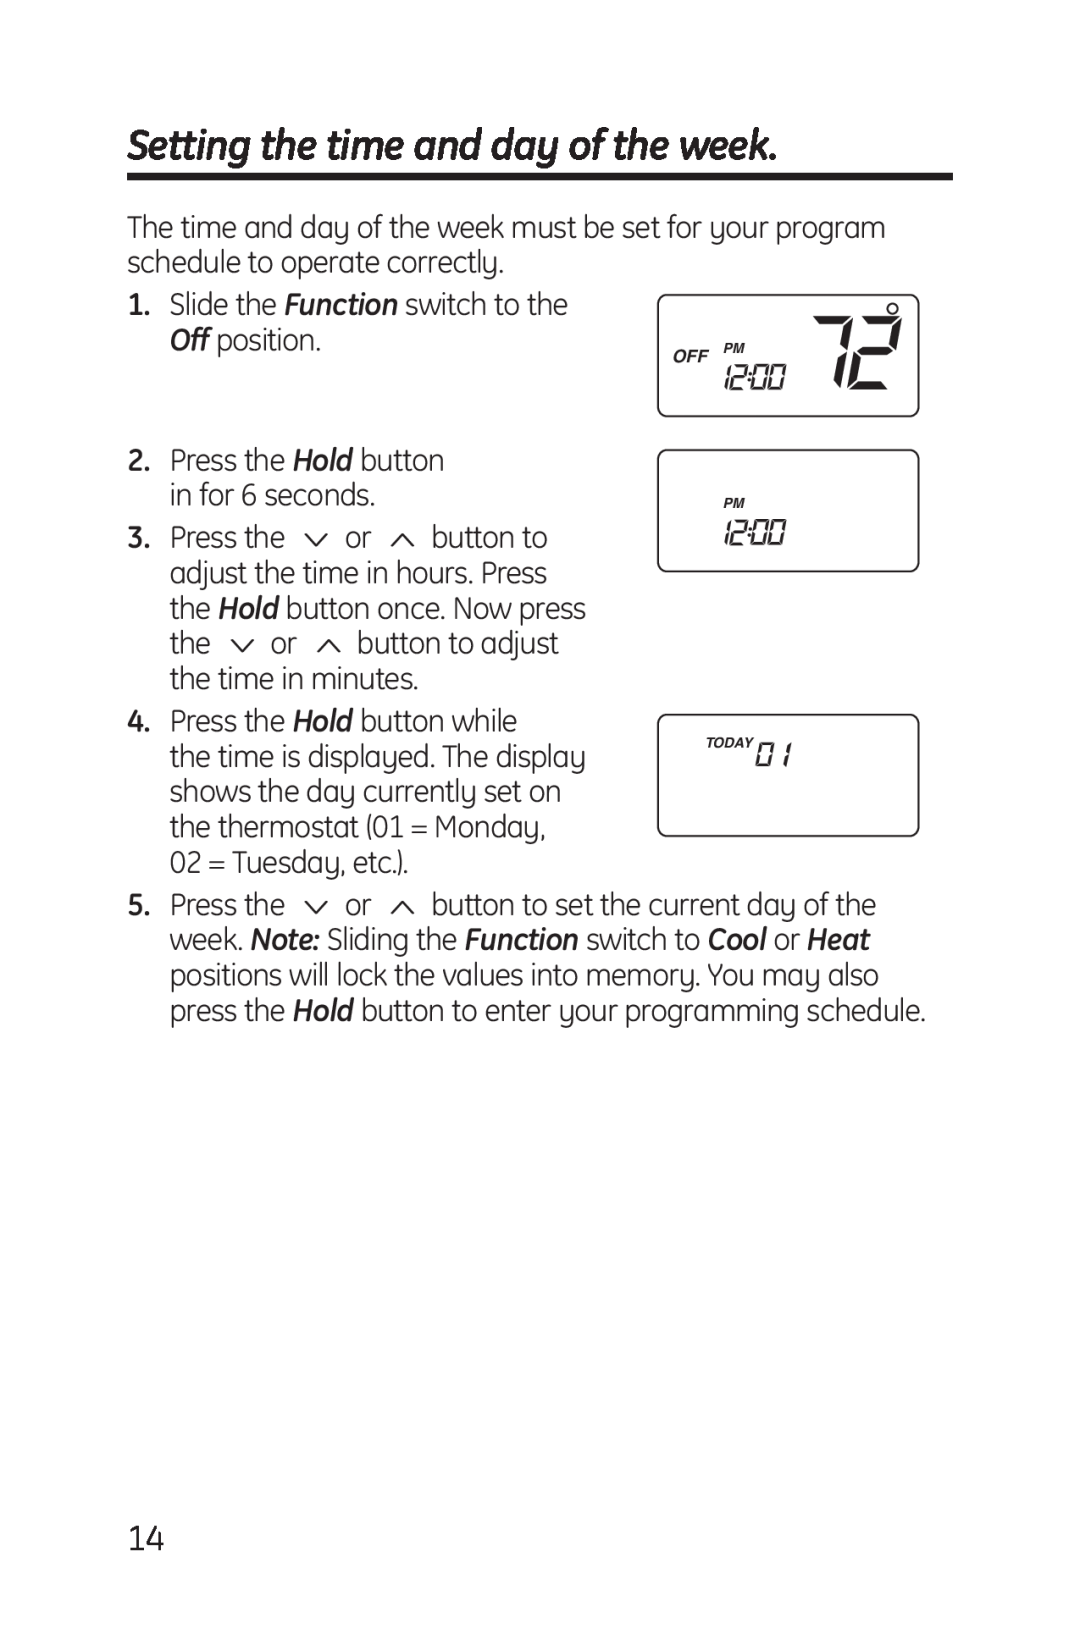 GE RAK164P1, RAK148P1 installation instructions Setting the time and day of the week 